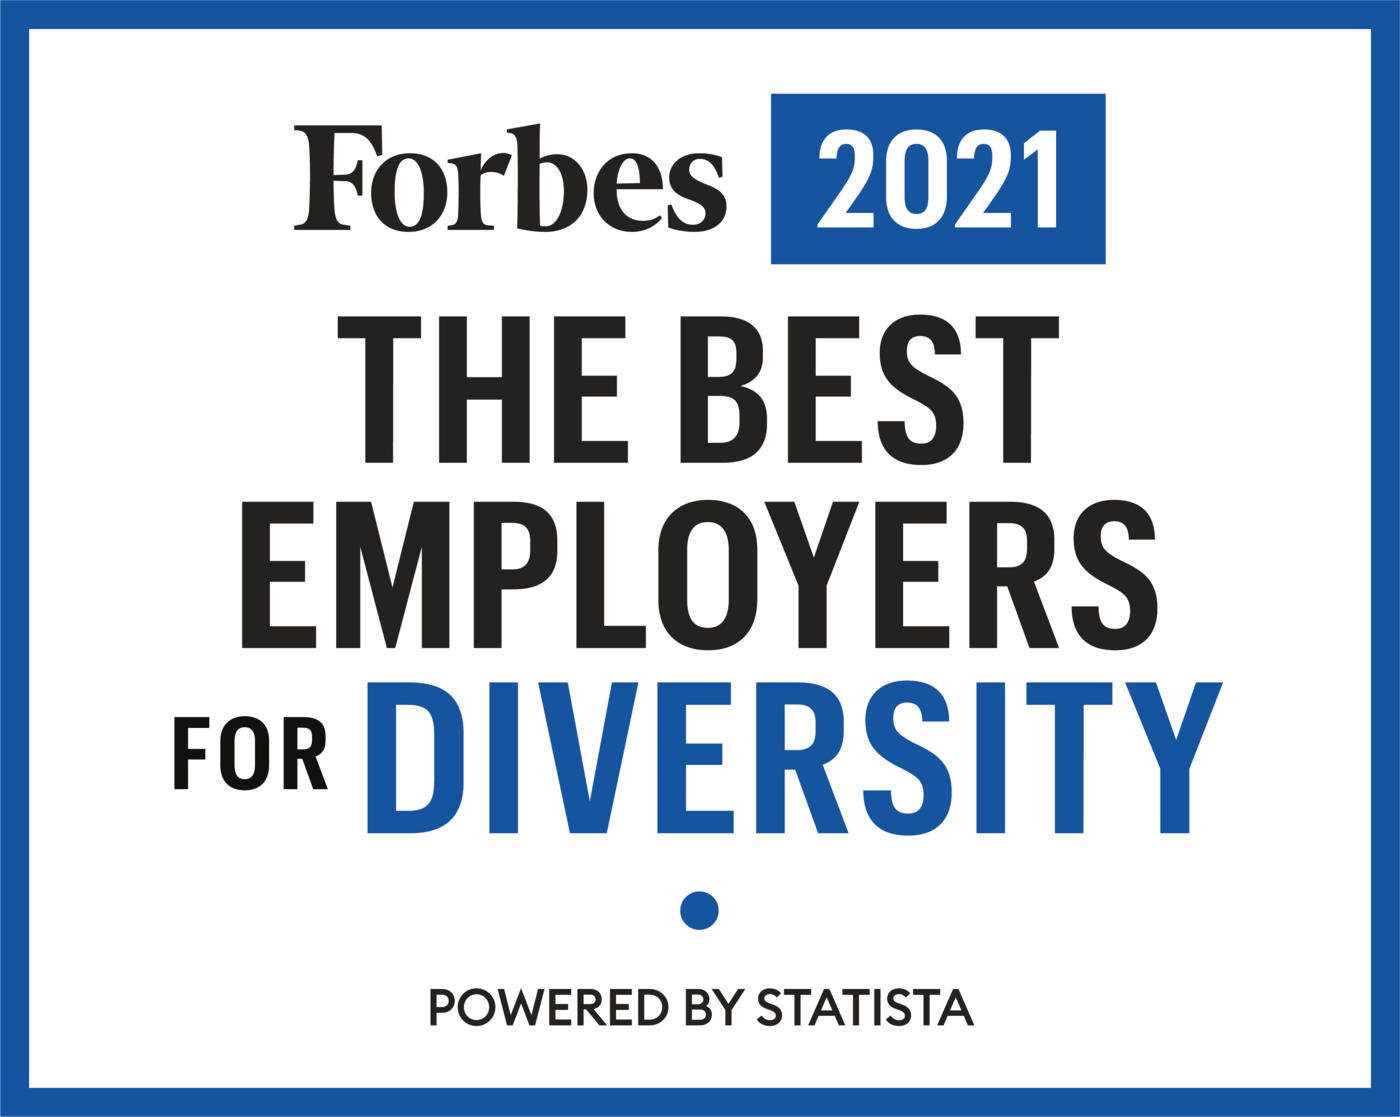 The BEST EMPLOYERS for Diversity